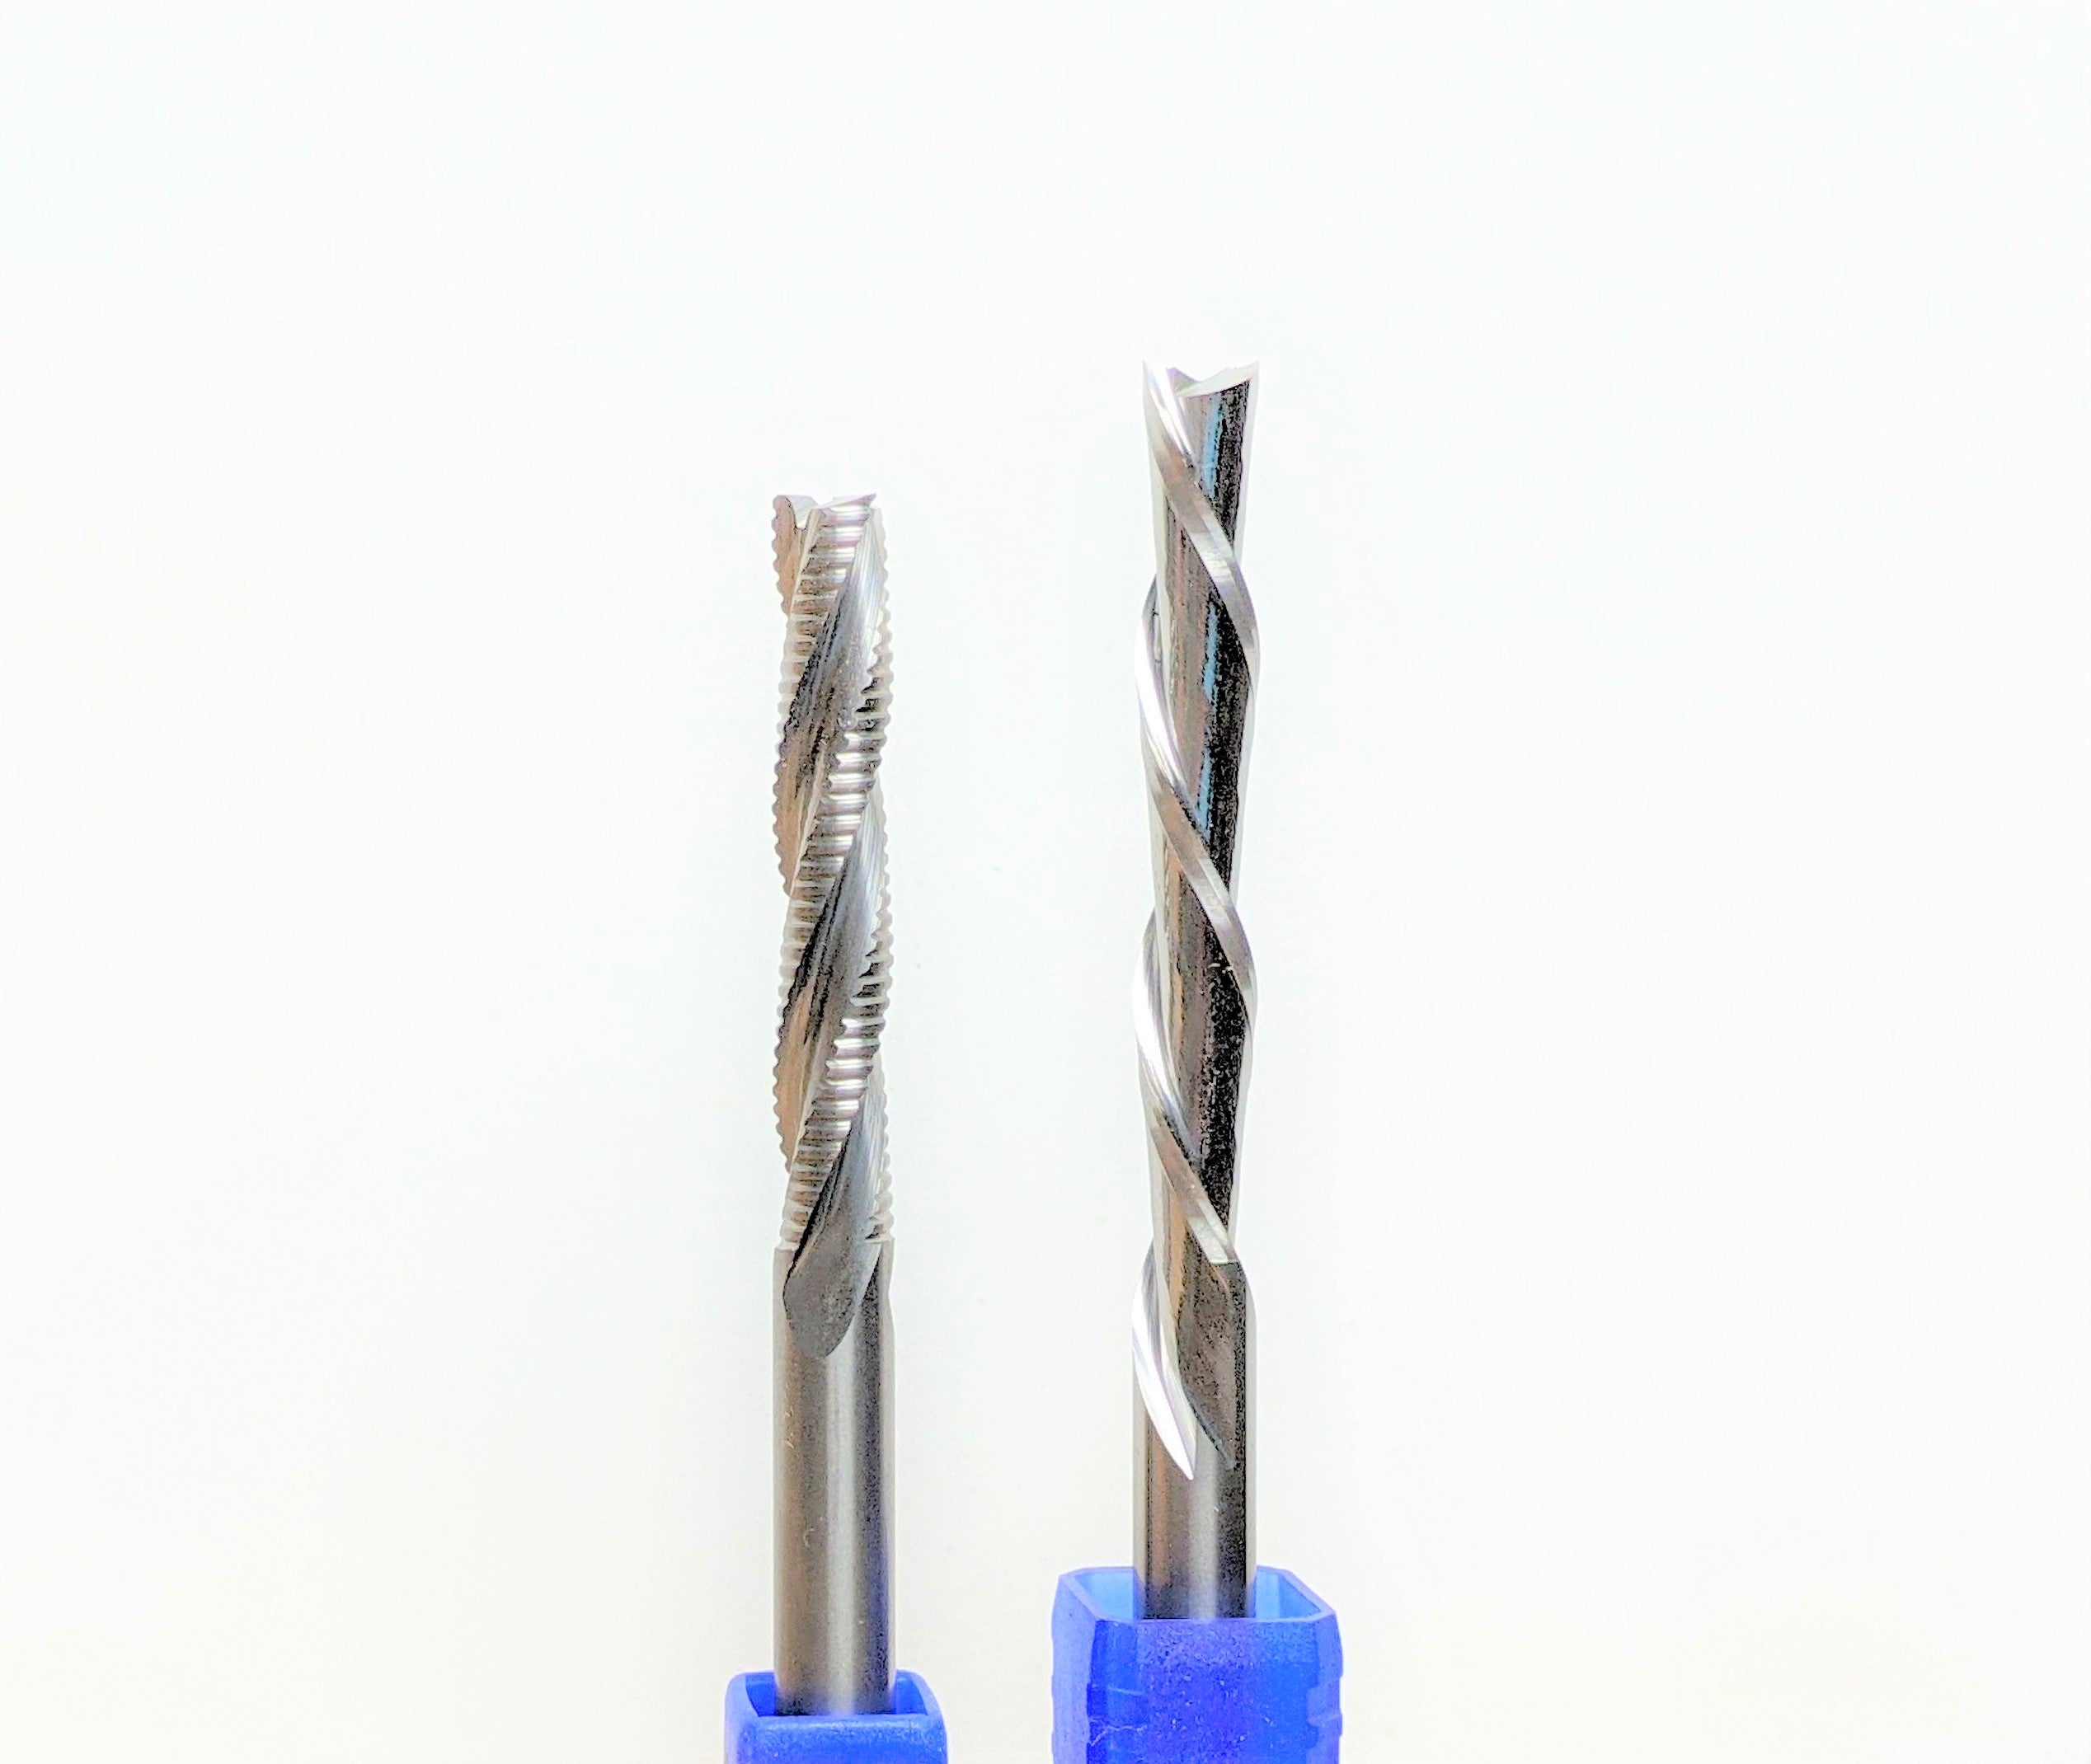 extra long 1/4" end mill set for guitar making with a cnc router